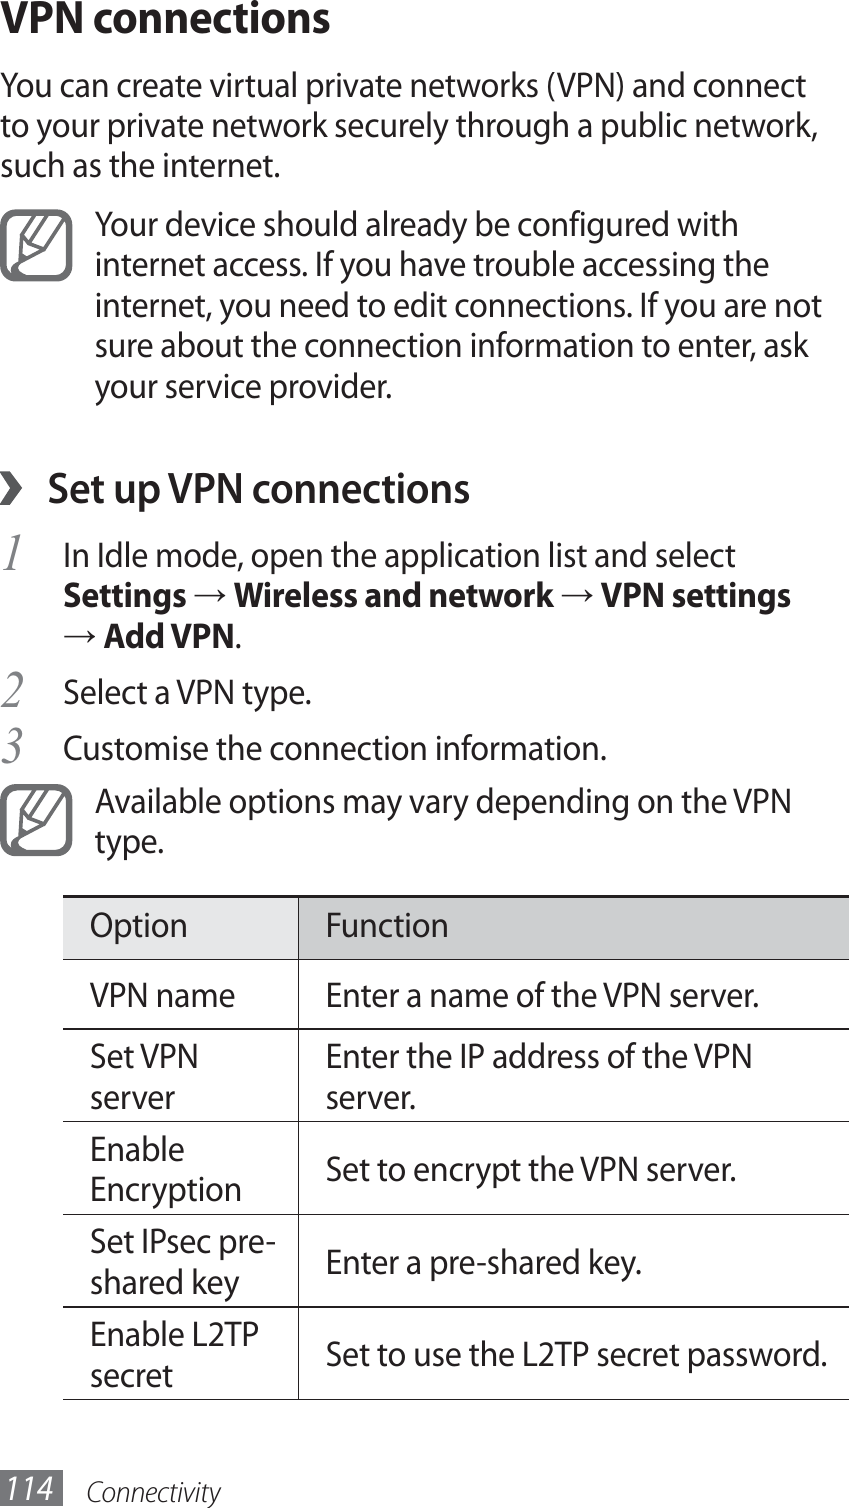 Connectivity114VPN connectionsYou can create virtual private networks (VPN) and connect to your private network securely through a public network, such as the internet.Your device should already be configured with internet access. If you have trouble accessing the internet, you need to edit connections. If you are not sure about the connection information to enter, ask your service provider.Set up VPN connections ›In Idle mode, open the application list and select 1 Settings → Wireless and network → VPN settings → Add VPN.Select a VPN type.2 Customise the connection information.3 Available options may vary depending on the VPN type.Option FunctionVPN name Enter a name of the VPN server.Set VPN serverEnter the IP address of the VPN server.Enable Encryption Set to encrypt the VPN server.Set IPsec pre-shared key Enter a pre-shared key.Enable L2TP secret Set to use the L2TP secret password.